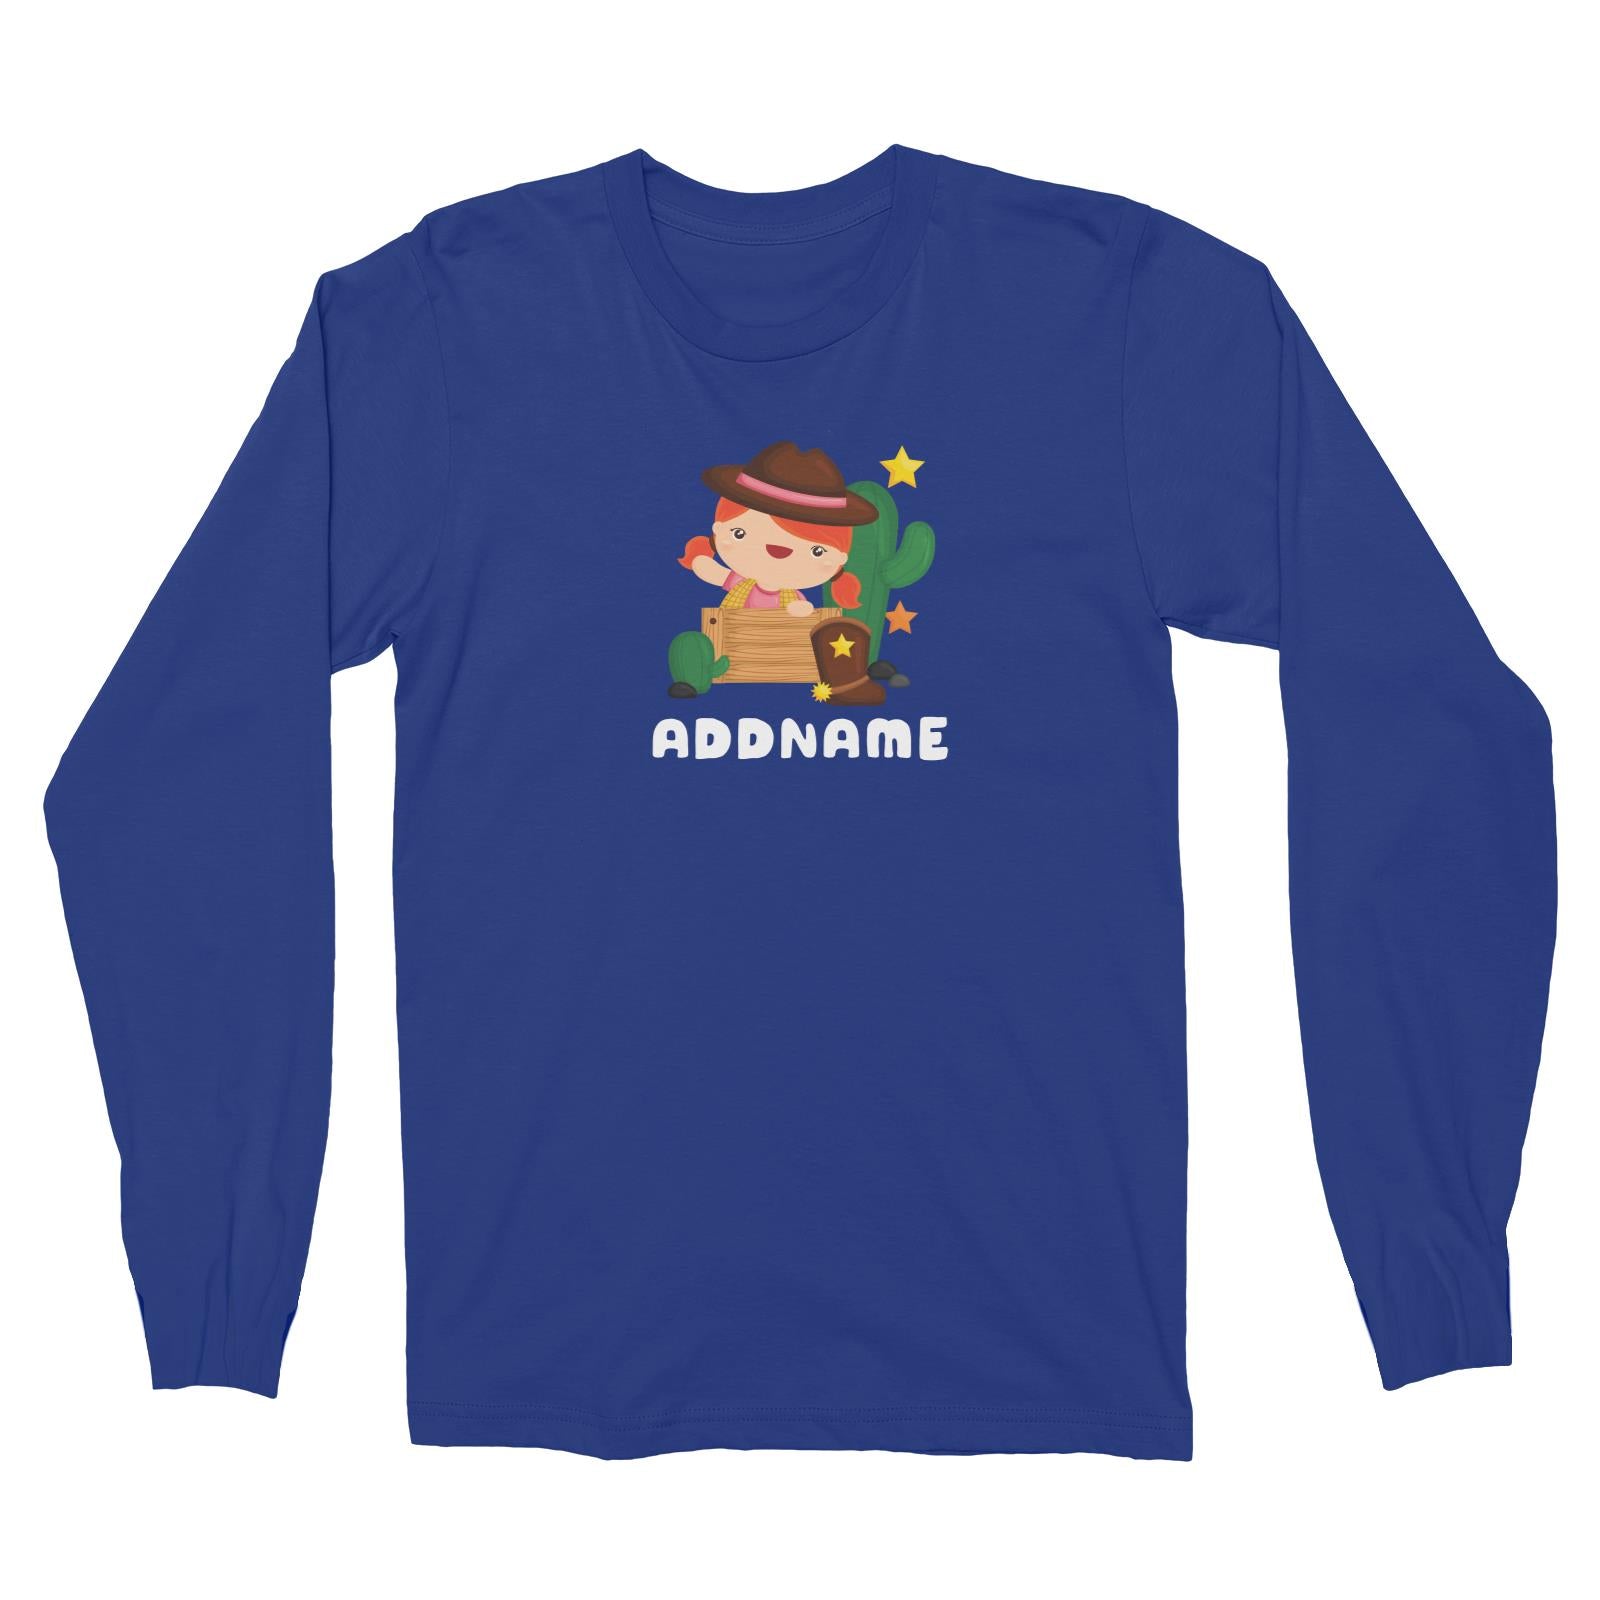 Birthday Cowboy Style Little Cowgirl Playing Wooden Box Addname Long Sleeve Unisex T-Shirt